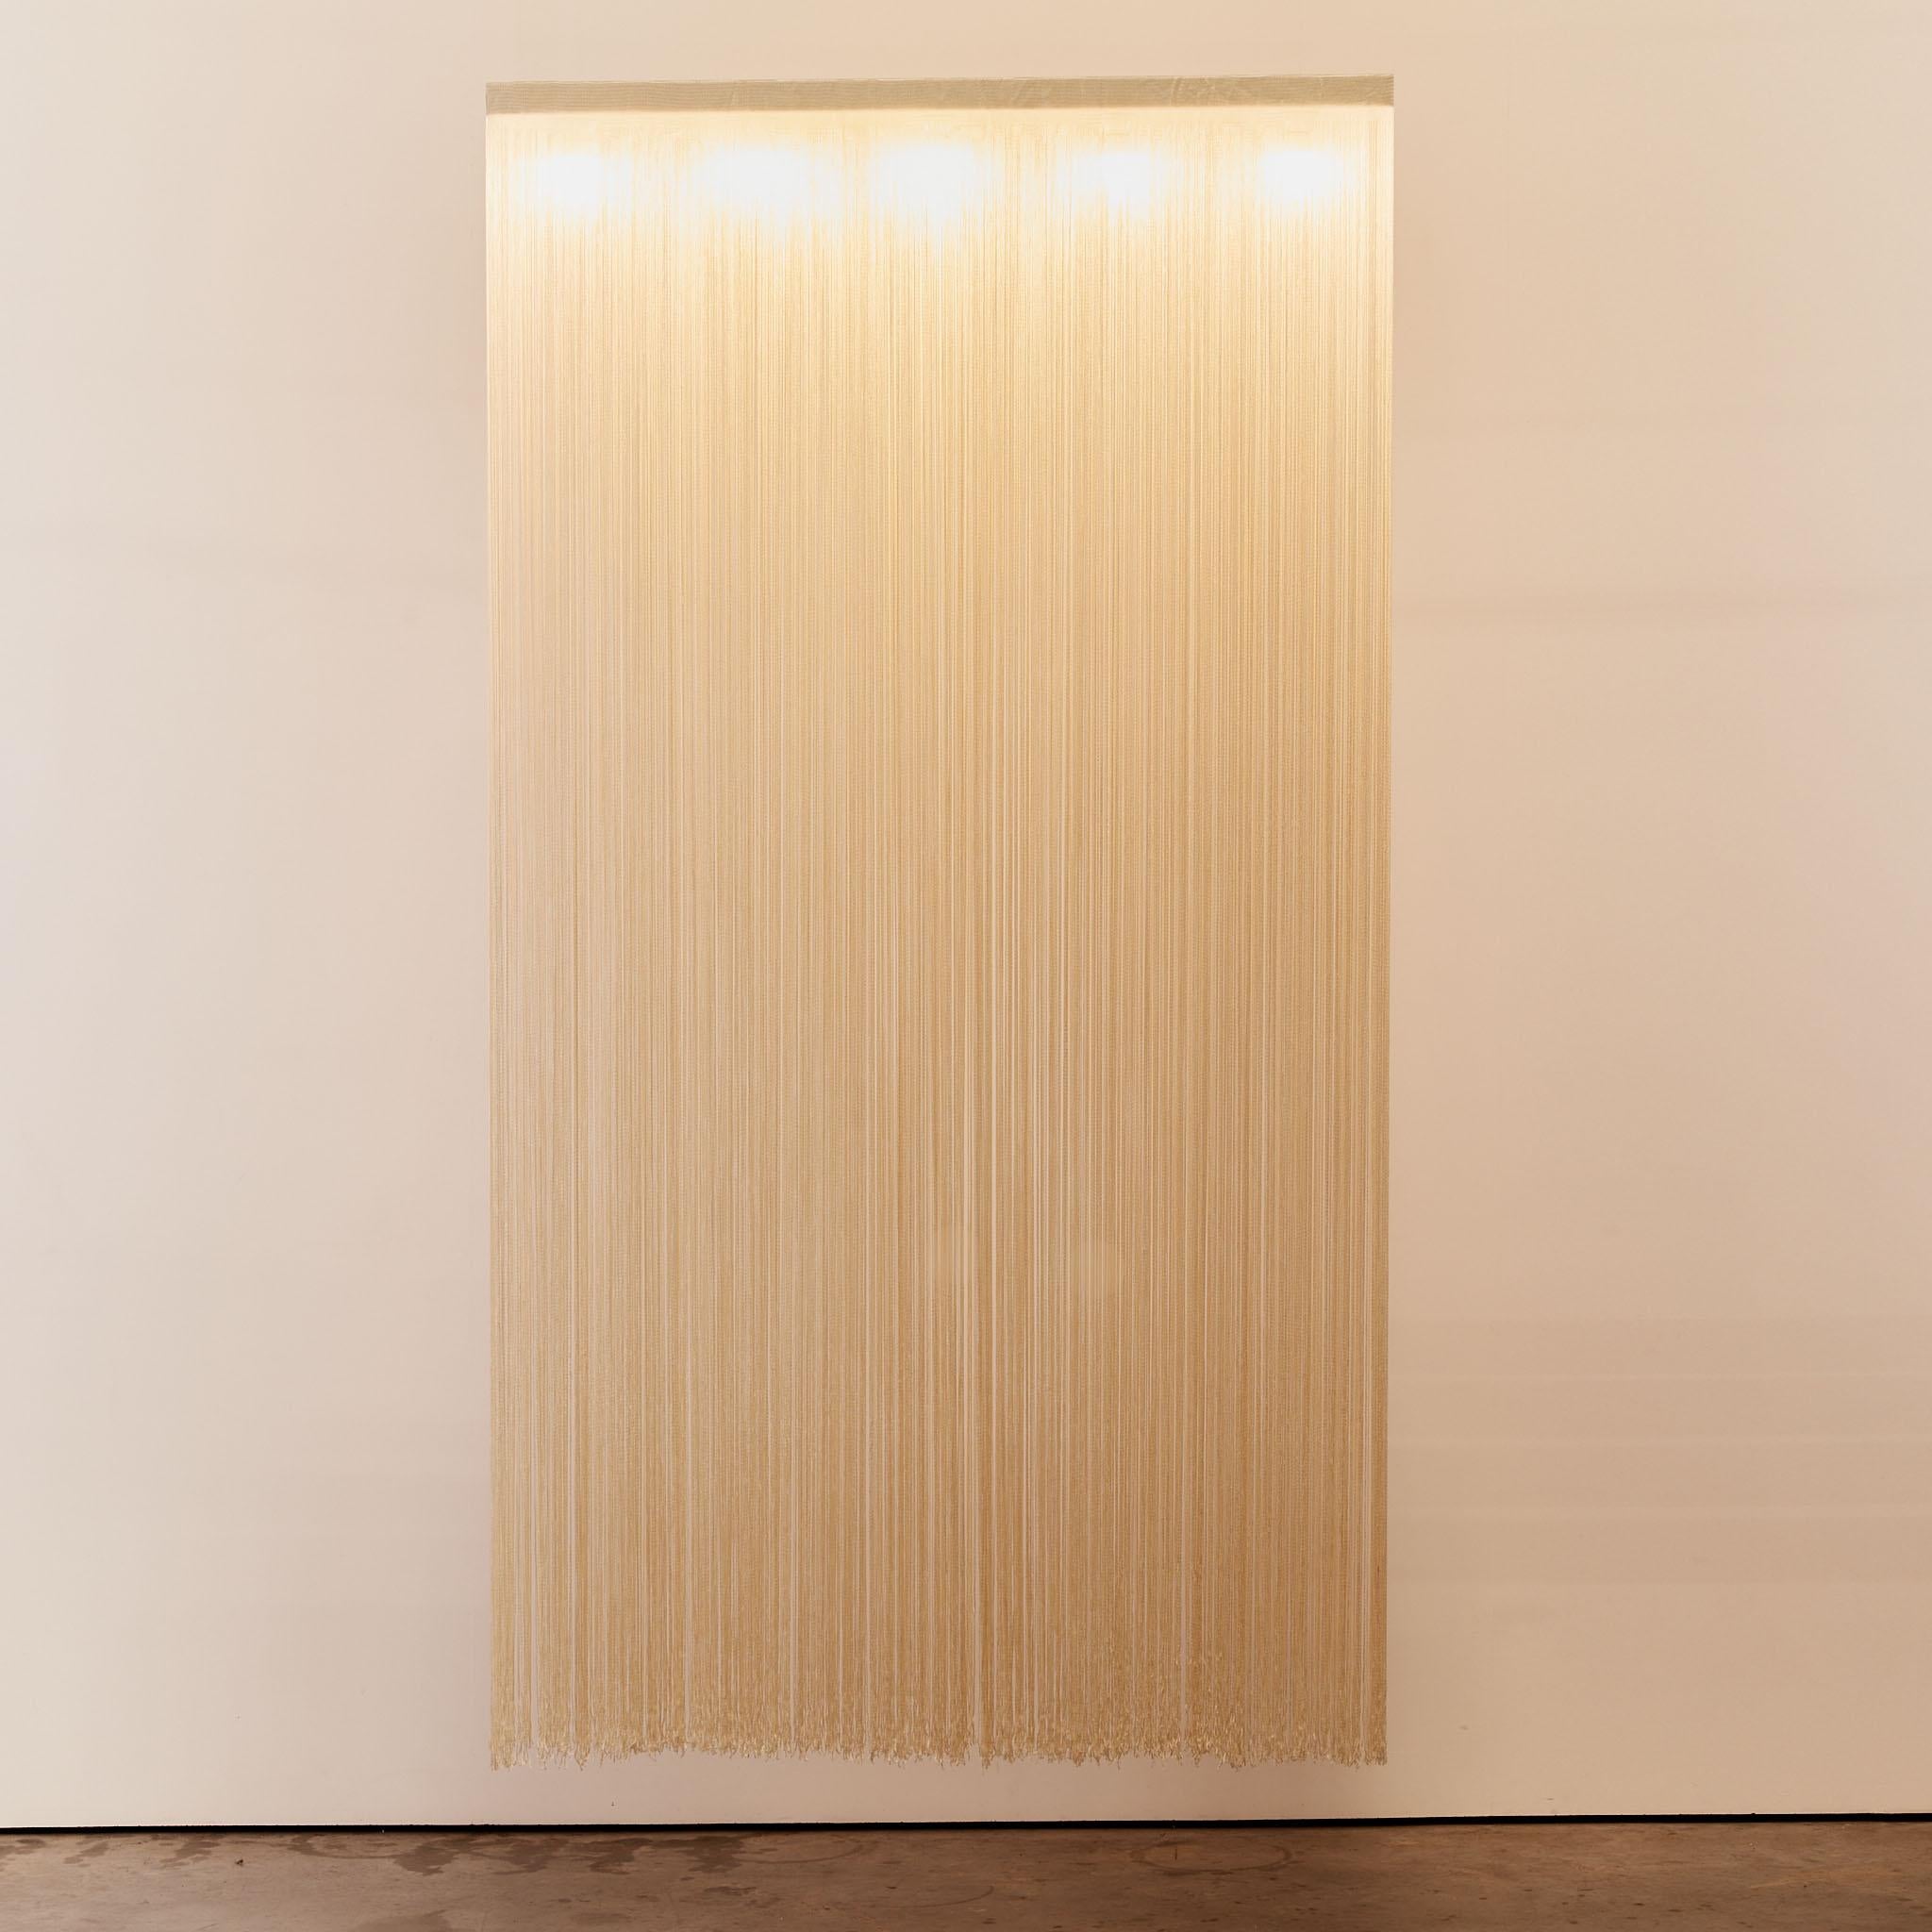 Garbo fringed ceiling light with steel light box that houses 5 bulbs and omits an ambient light, manufactured in Italy by Sirrah. This needs to be hard wired into the ceiling. 

Mariyo Yagi was born in 1948 in Kobe, Japan. Her best-known works, the